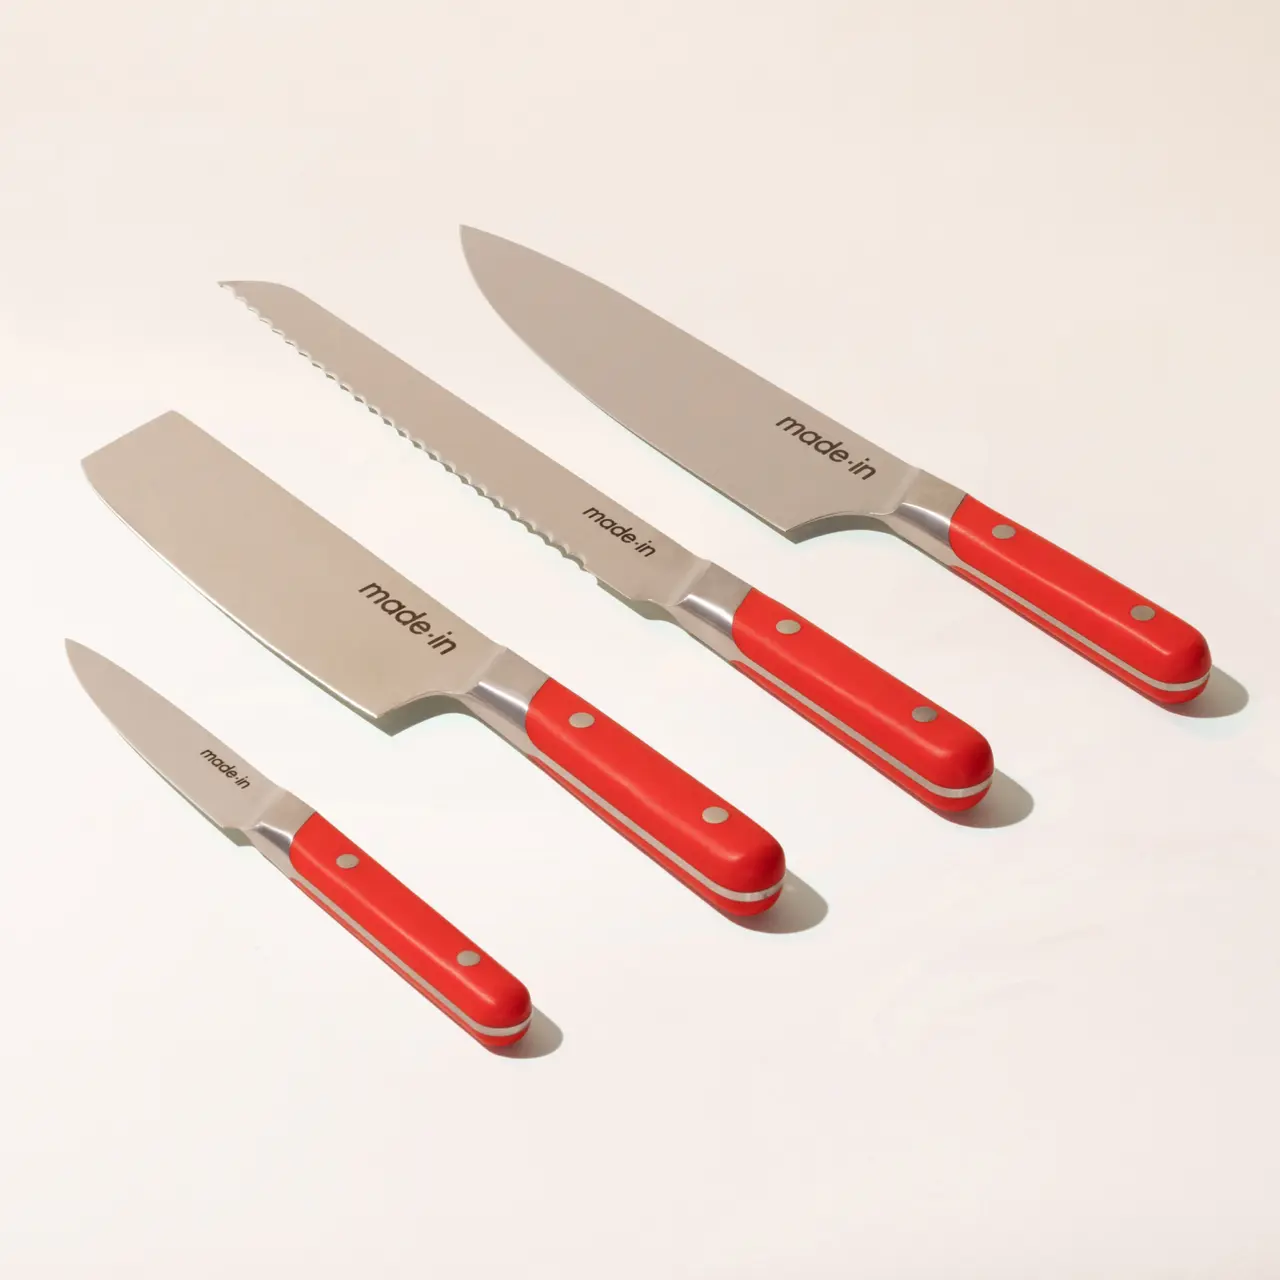 Four red-handled kitchen knives with different blade shapes arranged neatly on a light background.